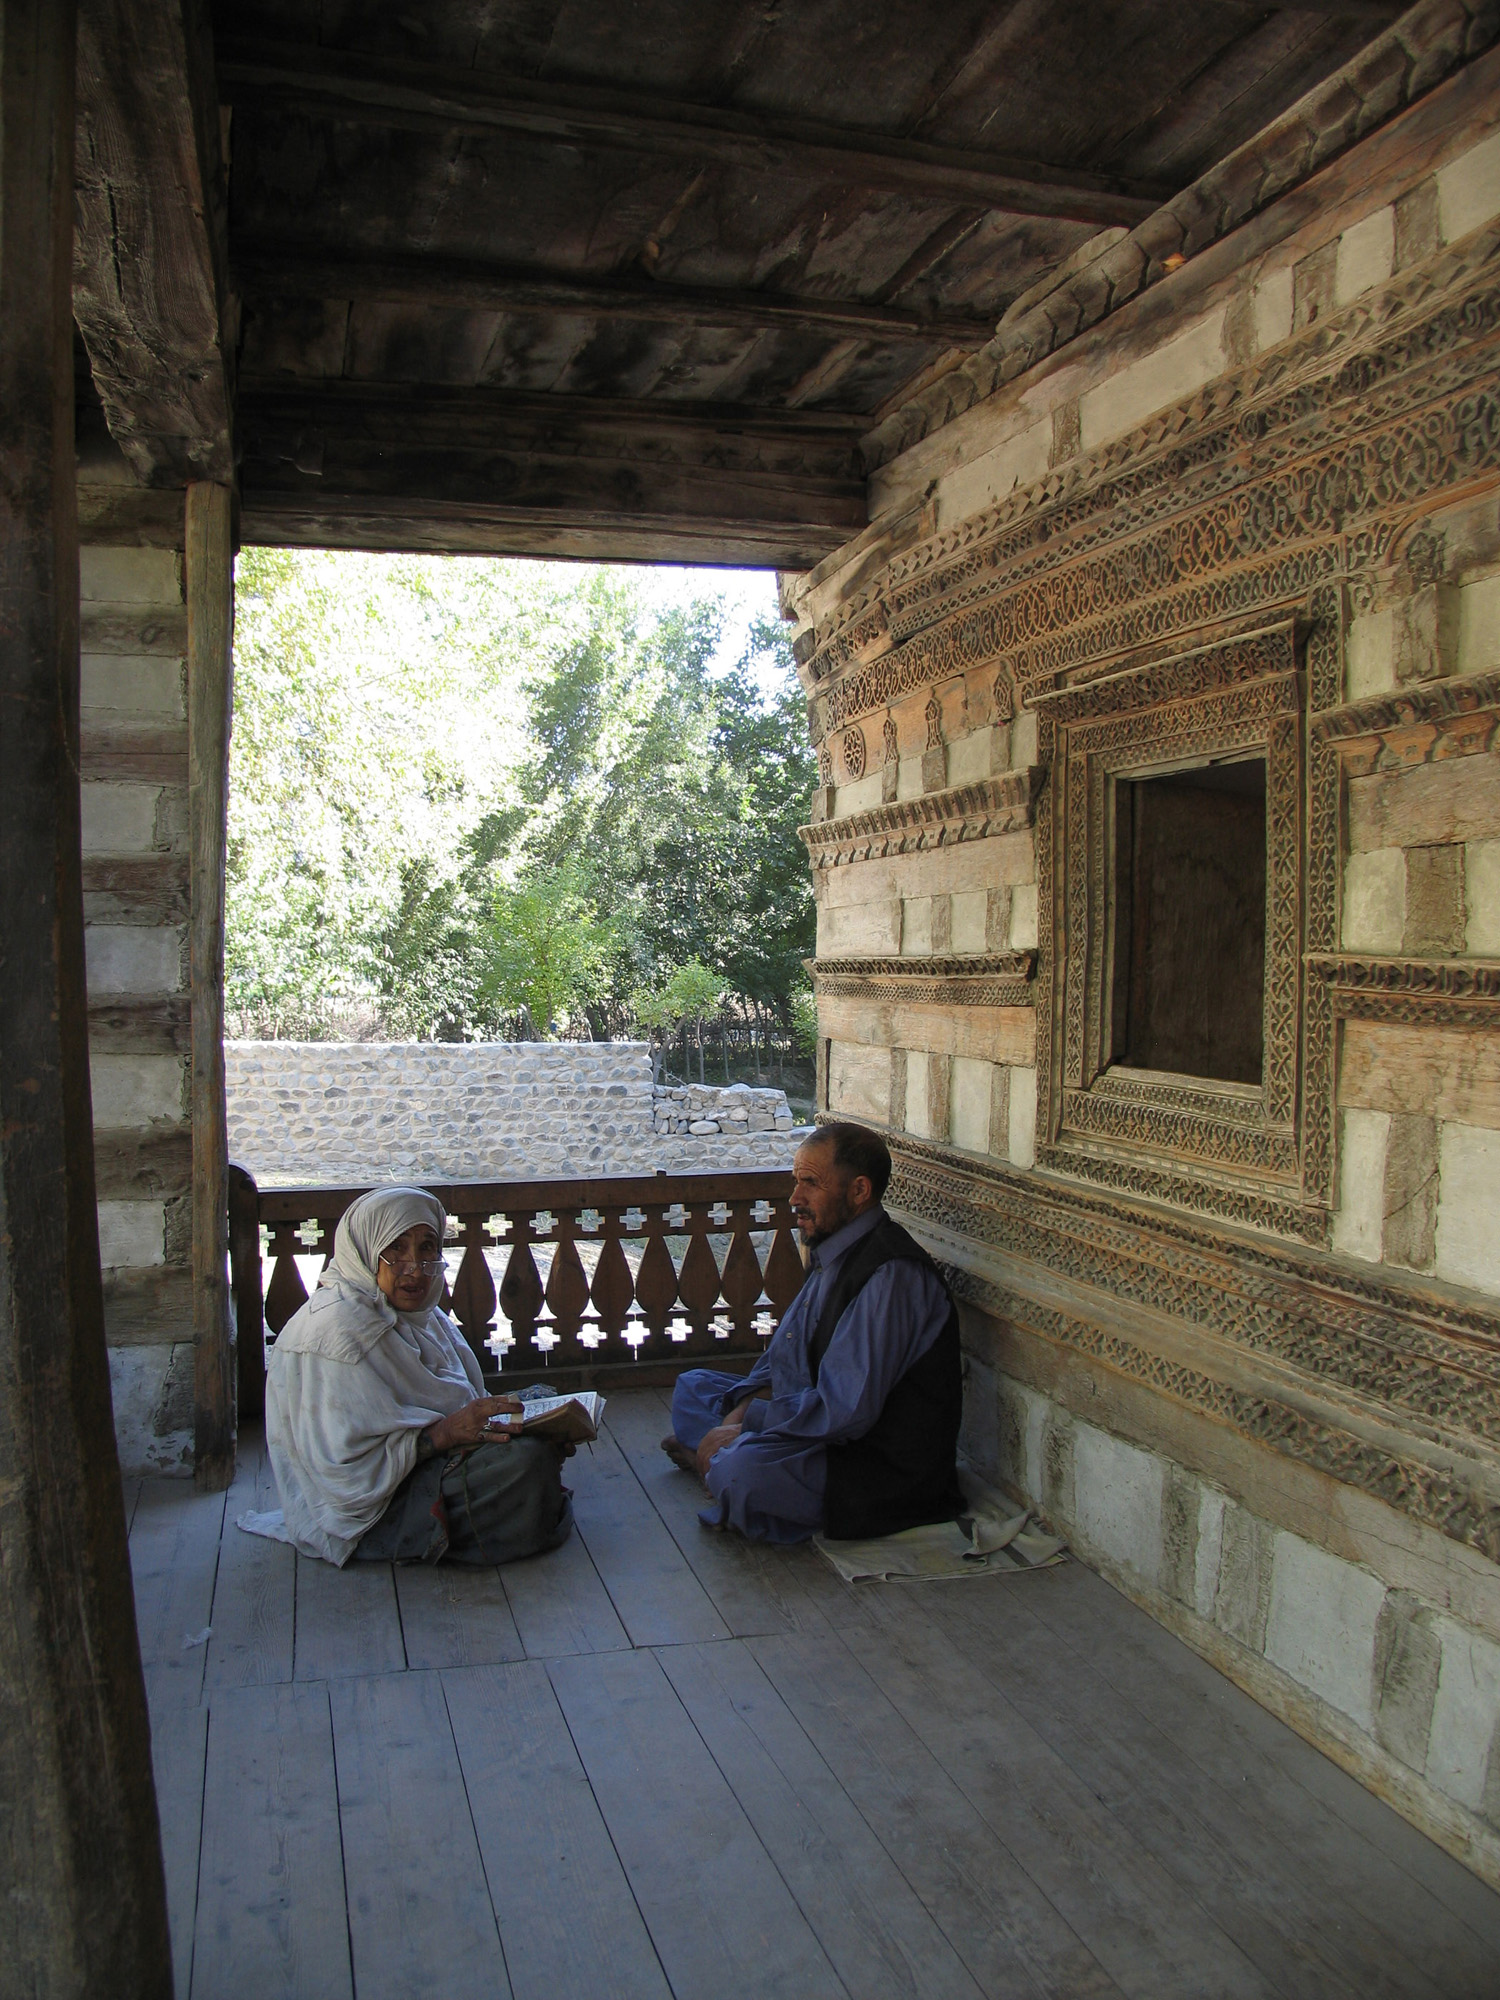 Locals in Mosques